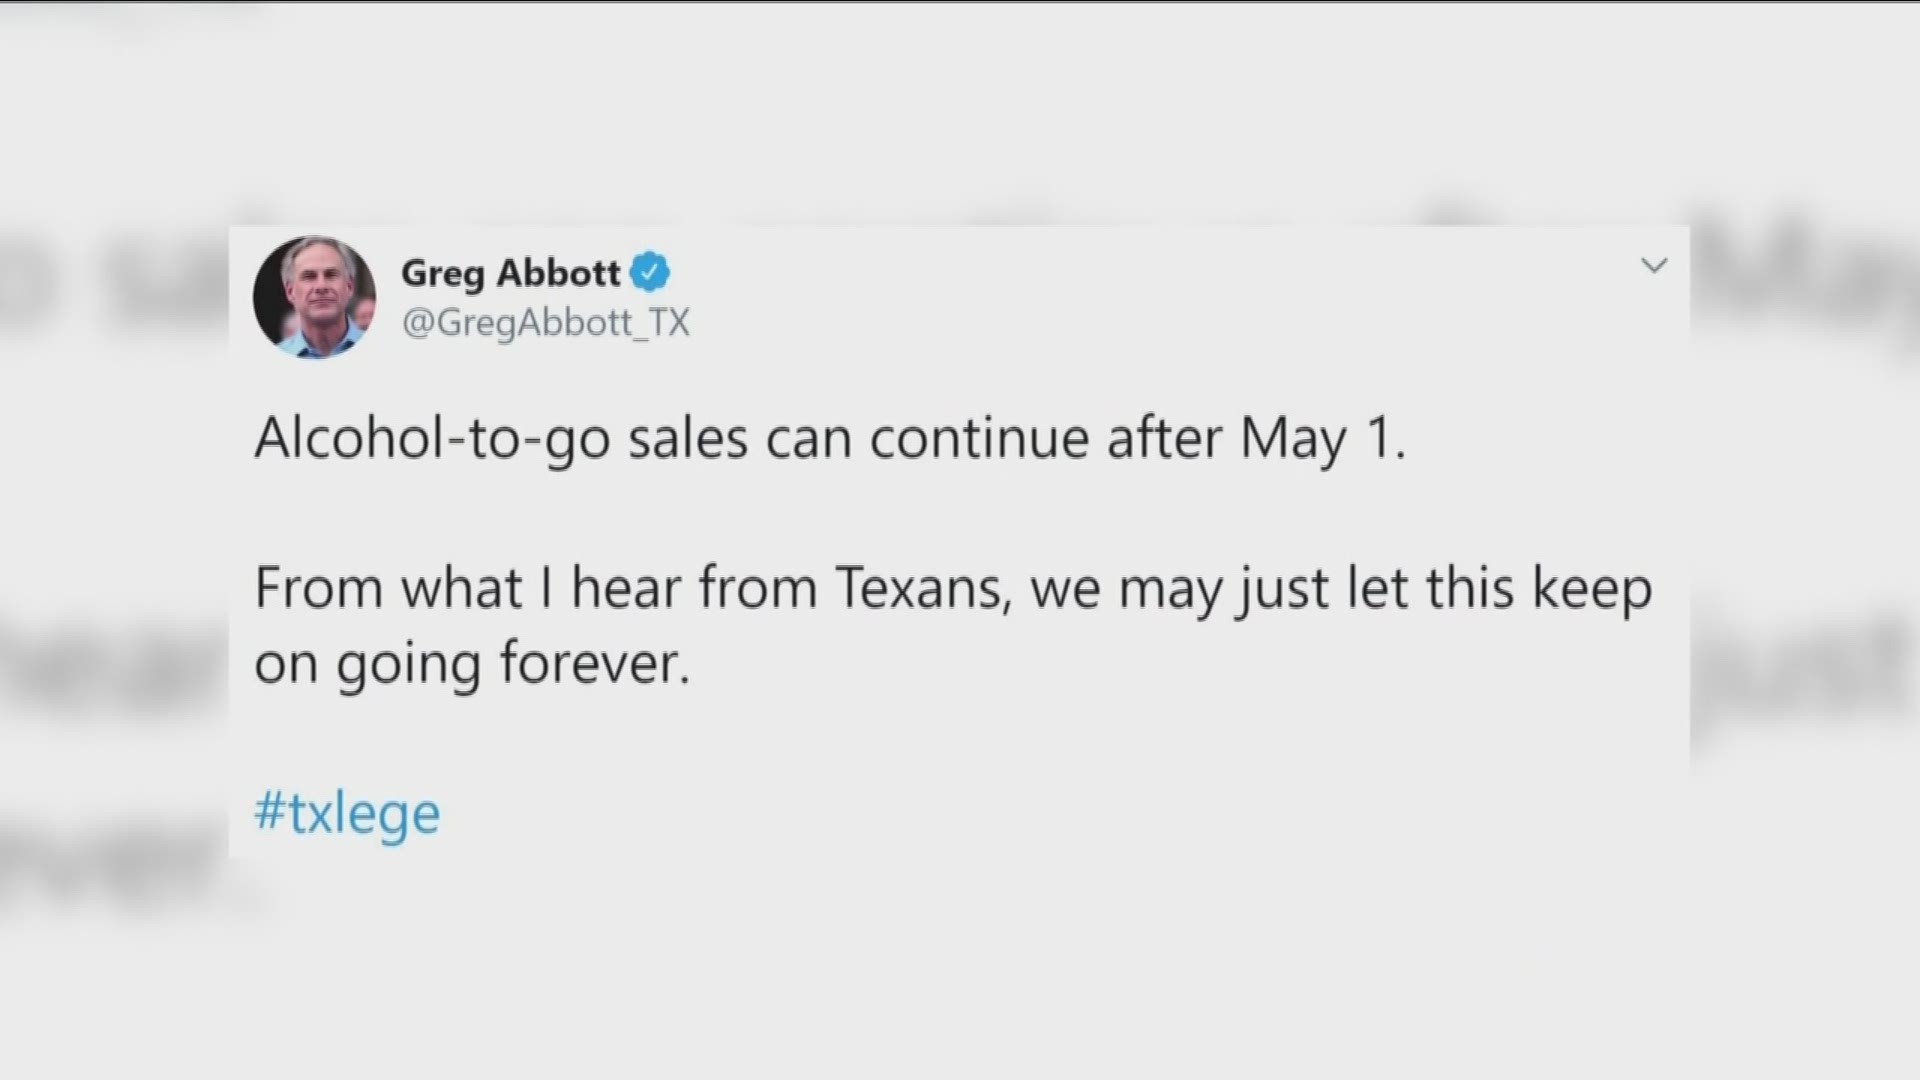 Gov. Abbott said the service may continue permanently – but there have been a lot of questions about what exactly "alcohol-to-go" means.